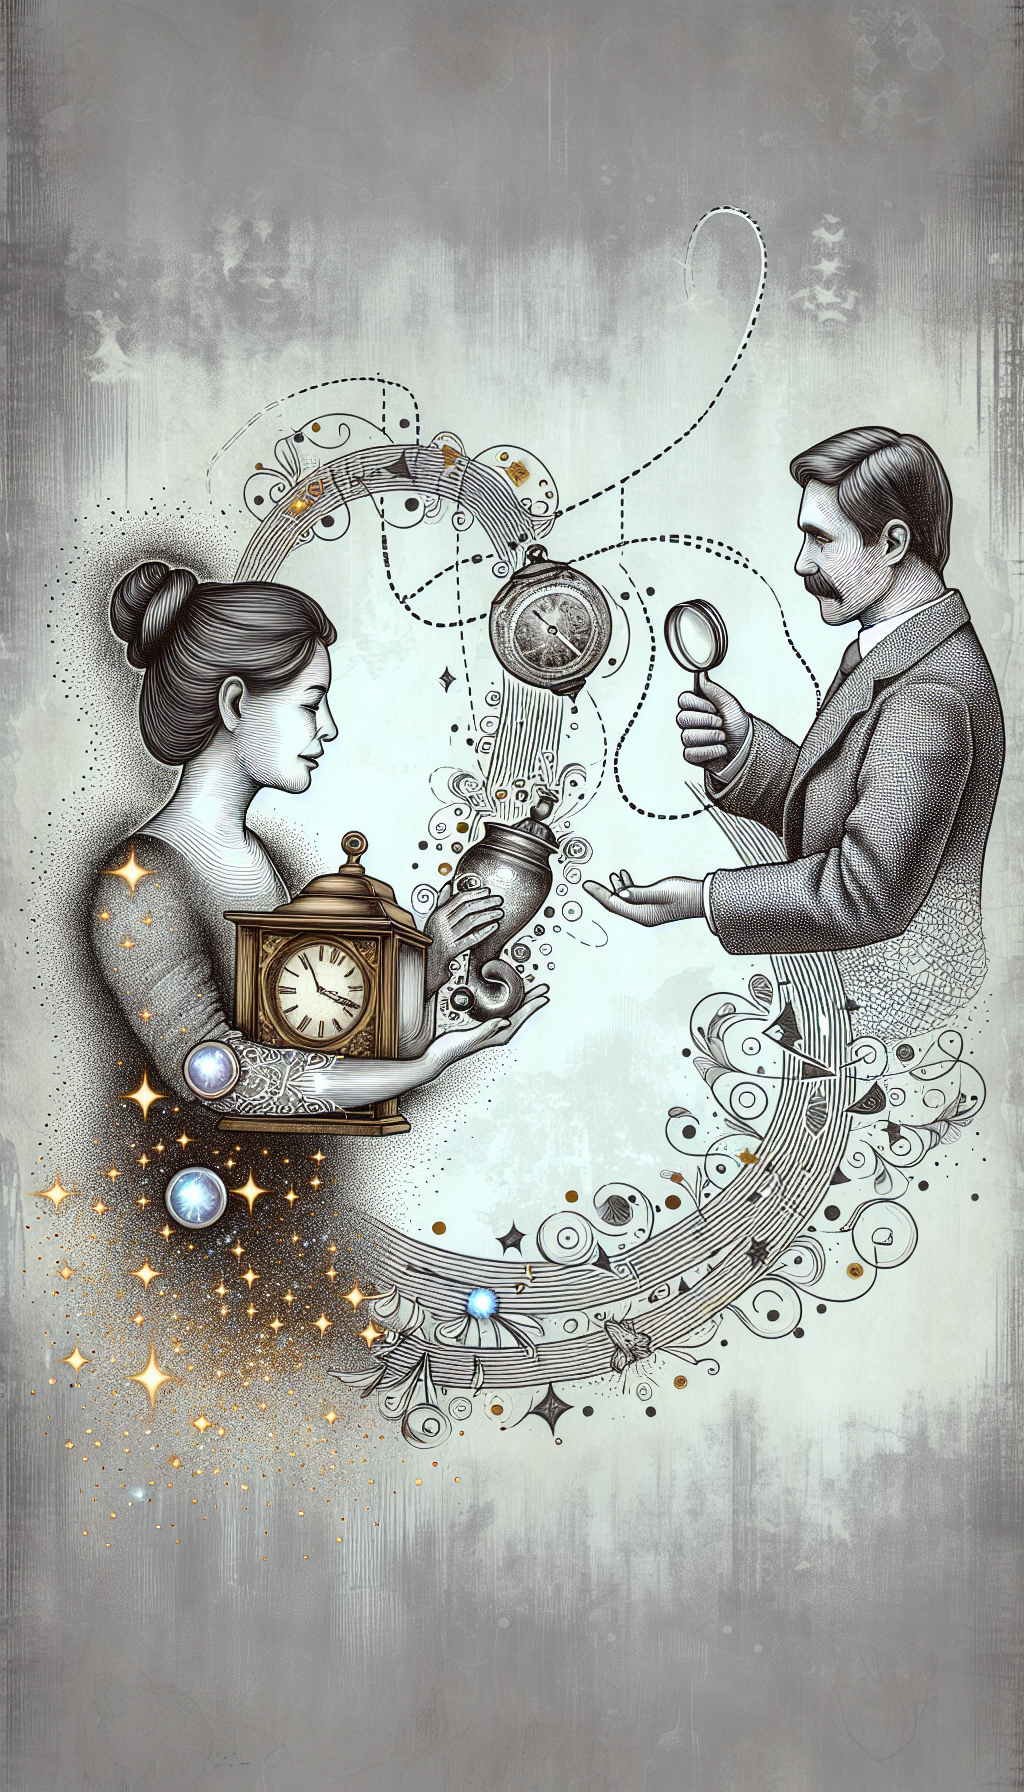 An elegantly hand-drawn image of a person holding a dusty vintage treasure (like a clock or a vase), with whimsical, sparkling lines leading to an appraiser with a magnifying glass, who’s giving a thumbs-up. A dashed, GPS-style line connects them, morphing into a "FREE" sign at the bottom. The juxtaposition of sketchy grayscale for the dusty object and vibrant colors for the appraisal service exemplifies transformation.